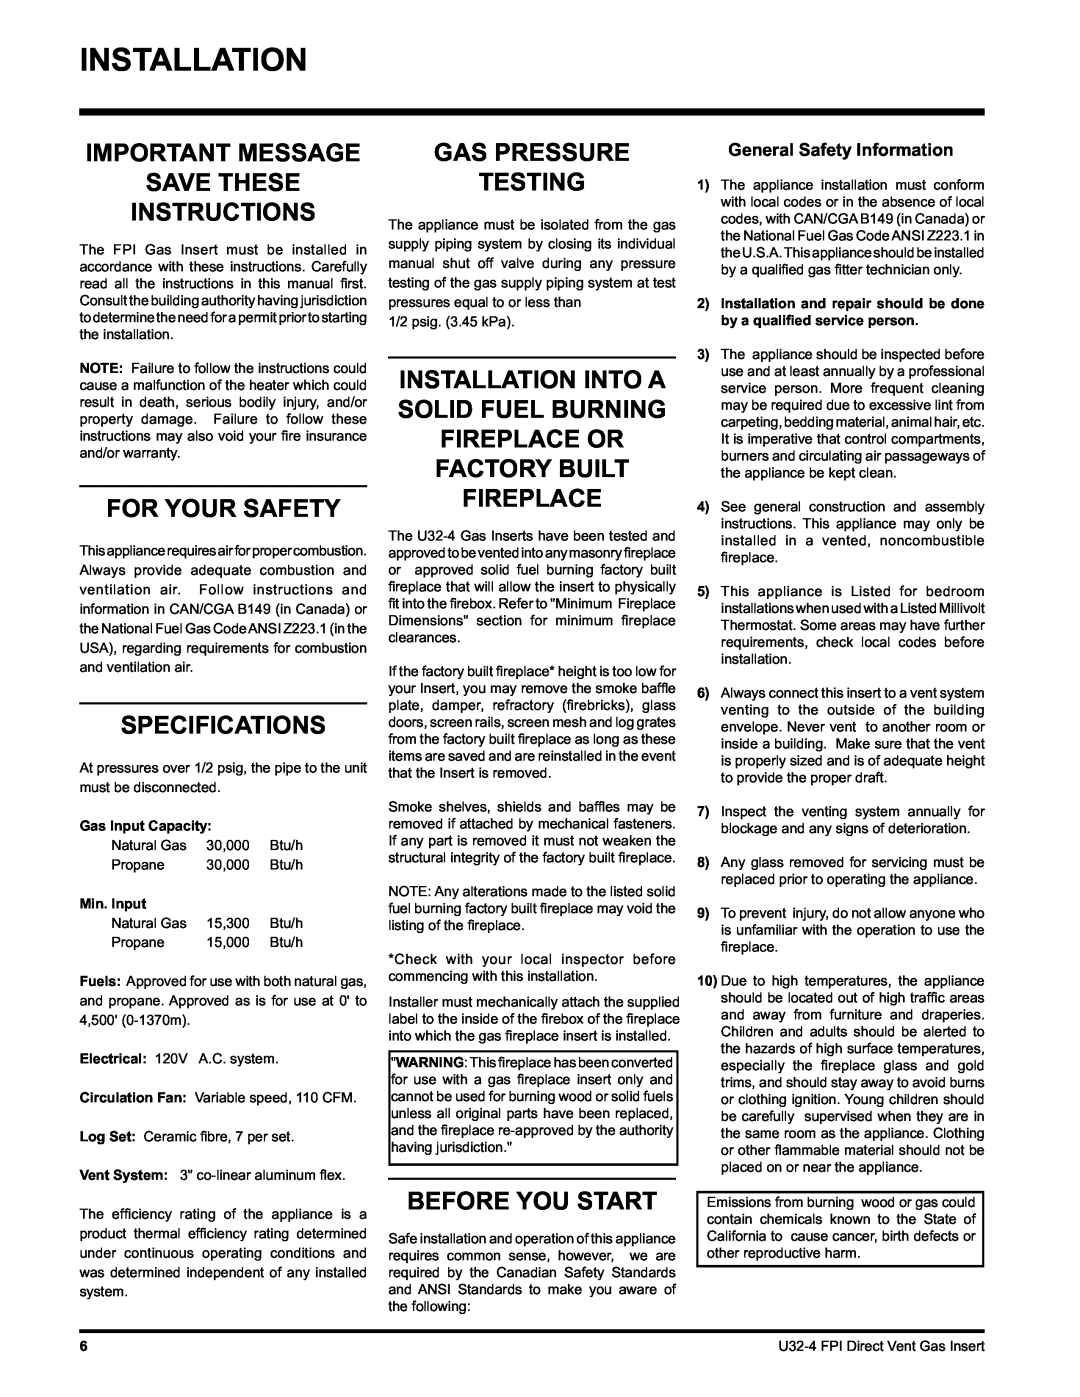 Regency U32-LP4, U32-NG4 Important Message Save These Instructions, For Your Safety, Specifications, Gas Pressure Testing 